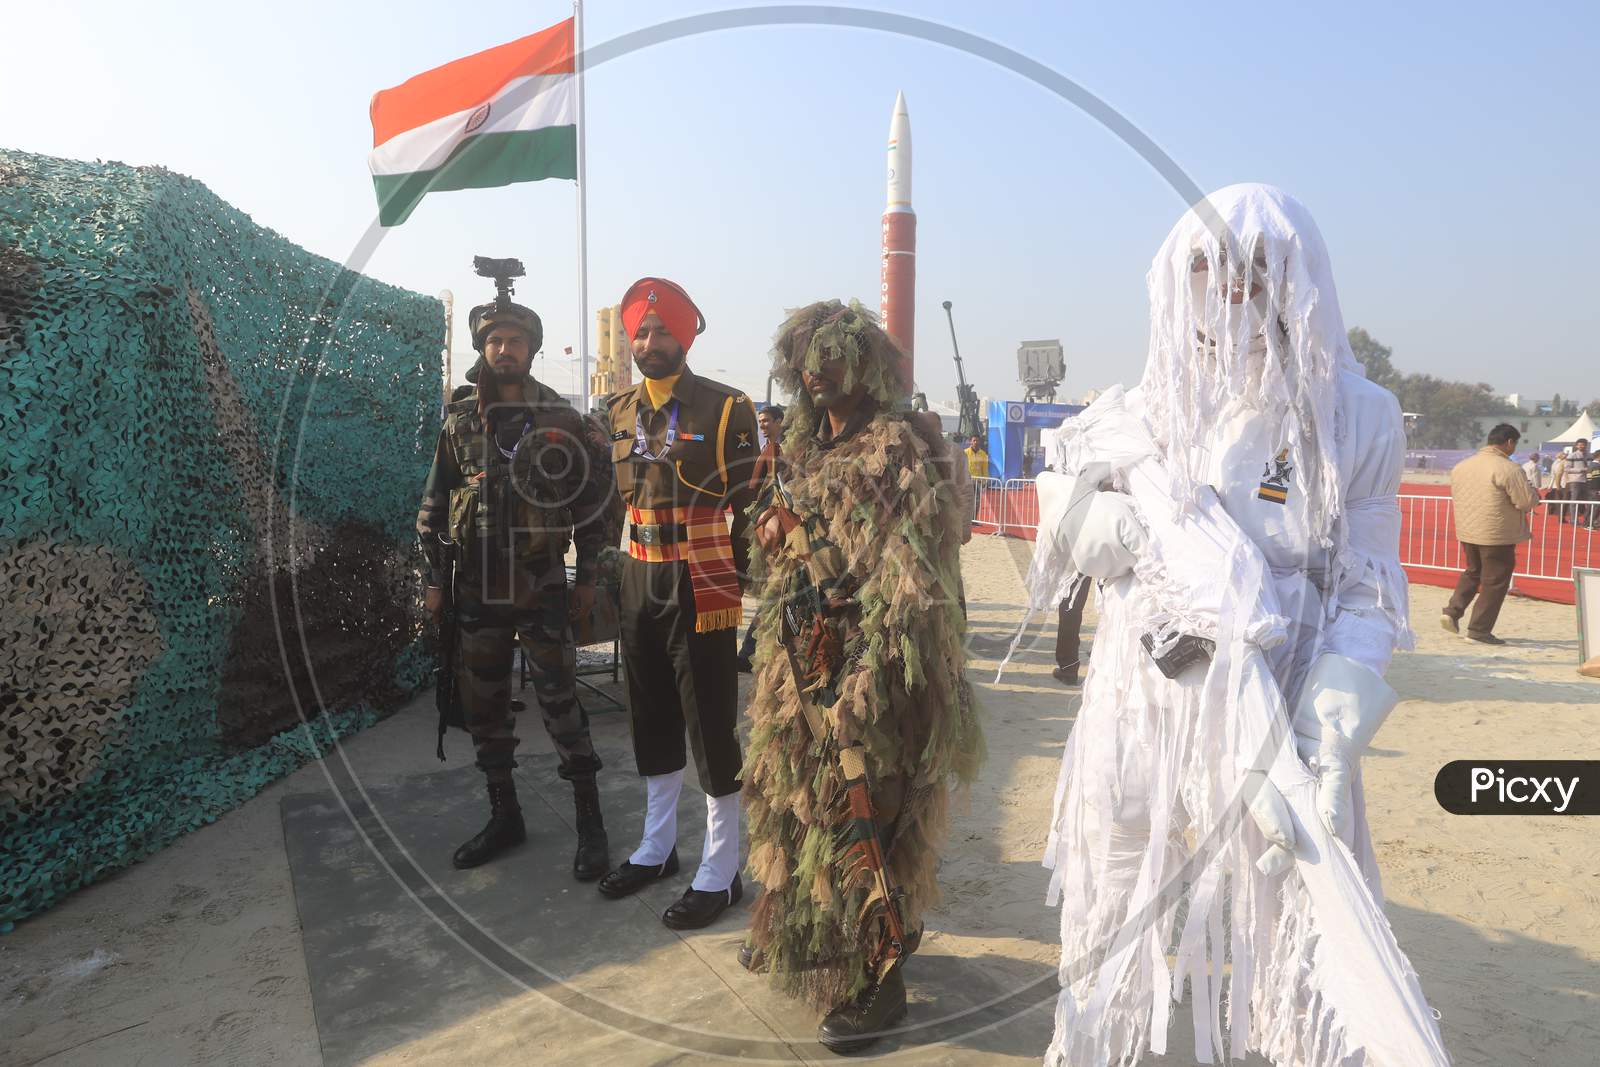 Indian Army Snipers Of All Kind   in Display At Defence  Expo a Flagship Event DefExpo 2020 By Ministry Of Defence ,Government Of India At Lucknow, Uttar Pradesh